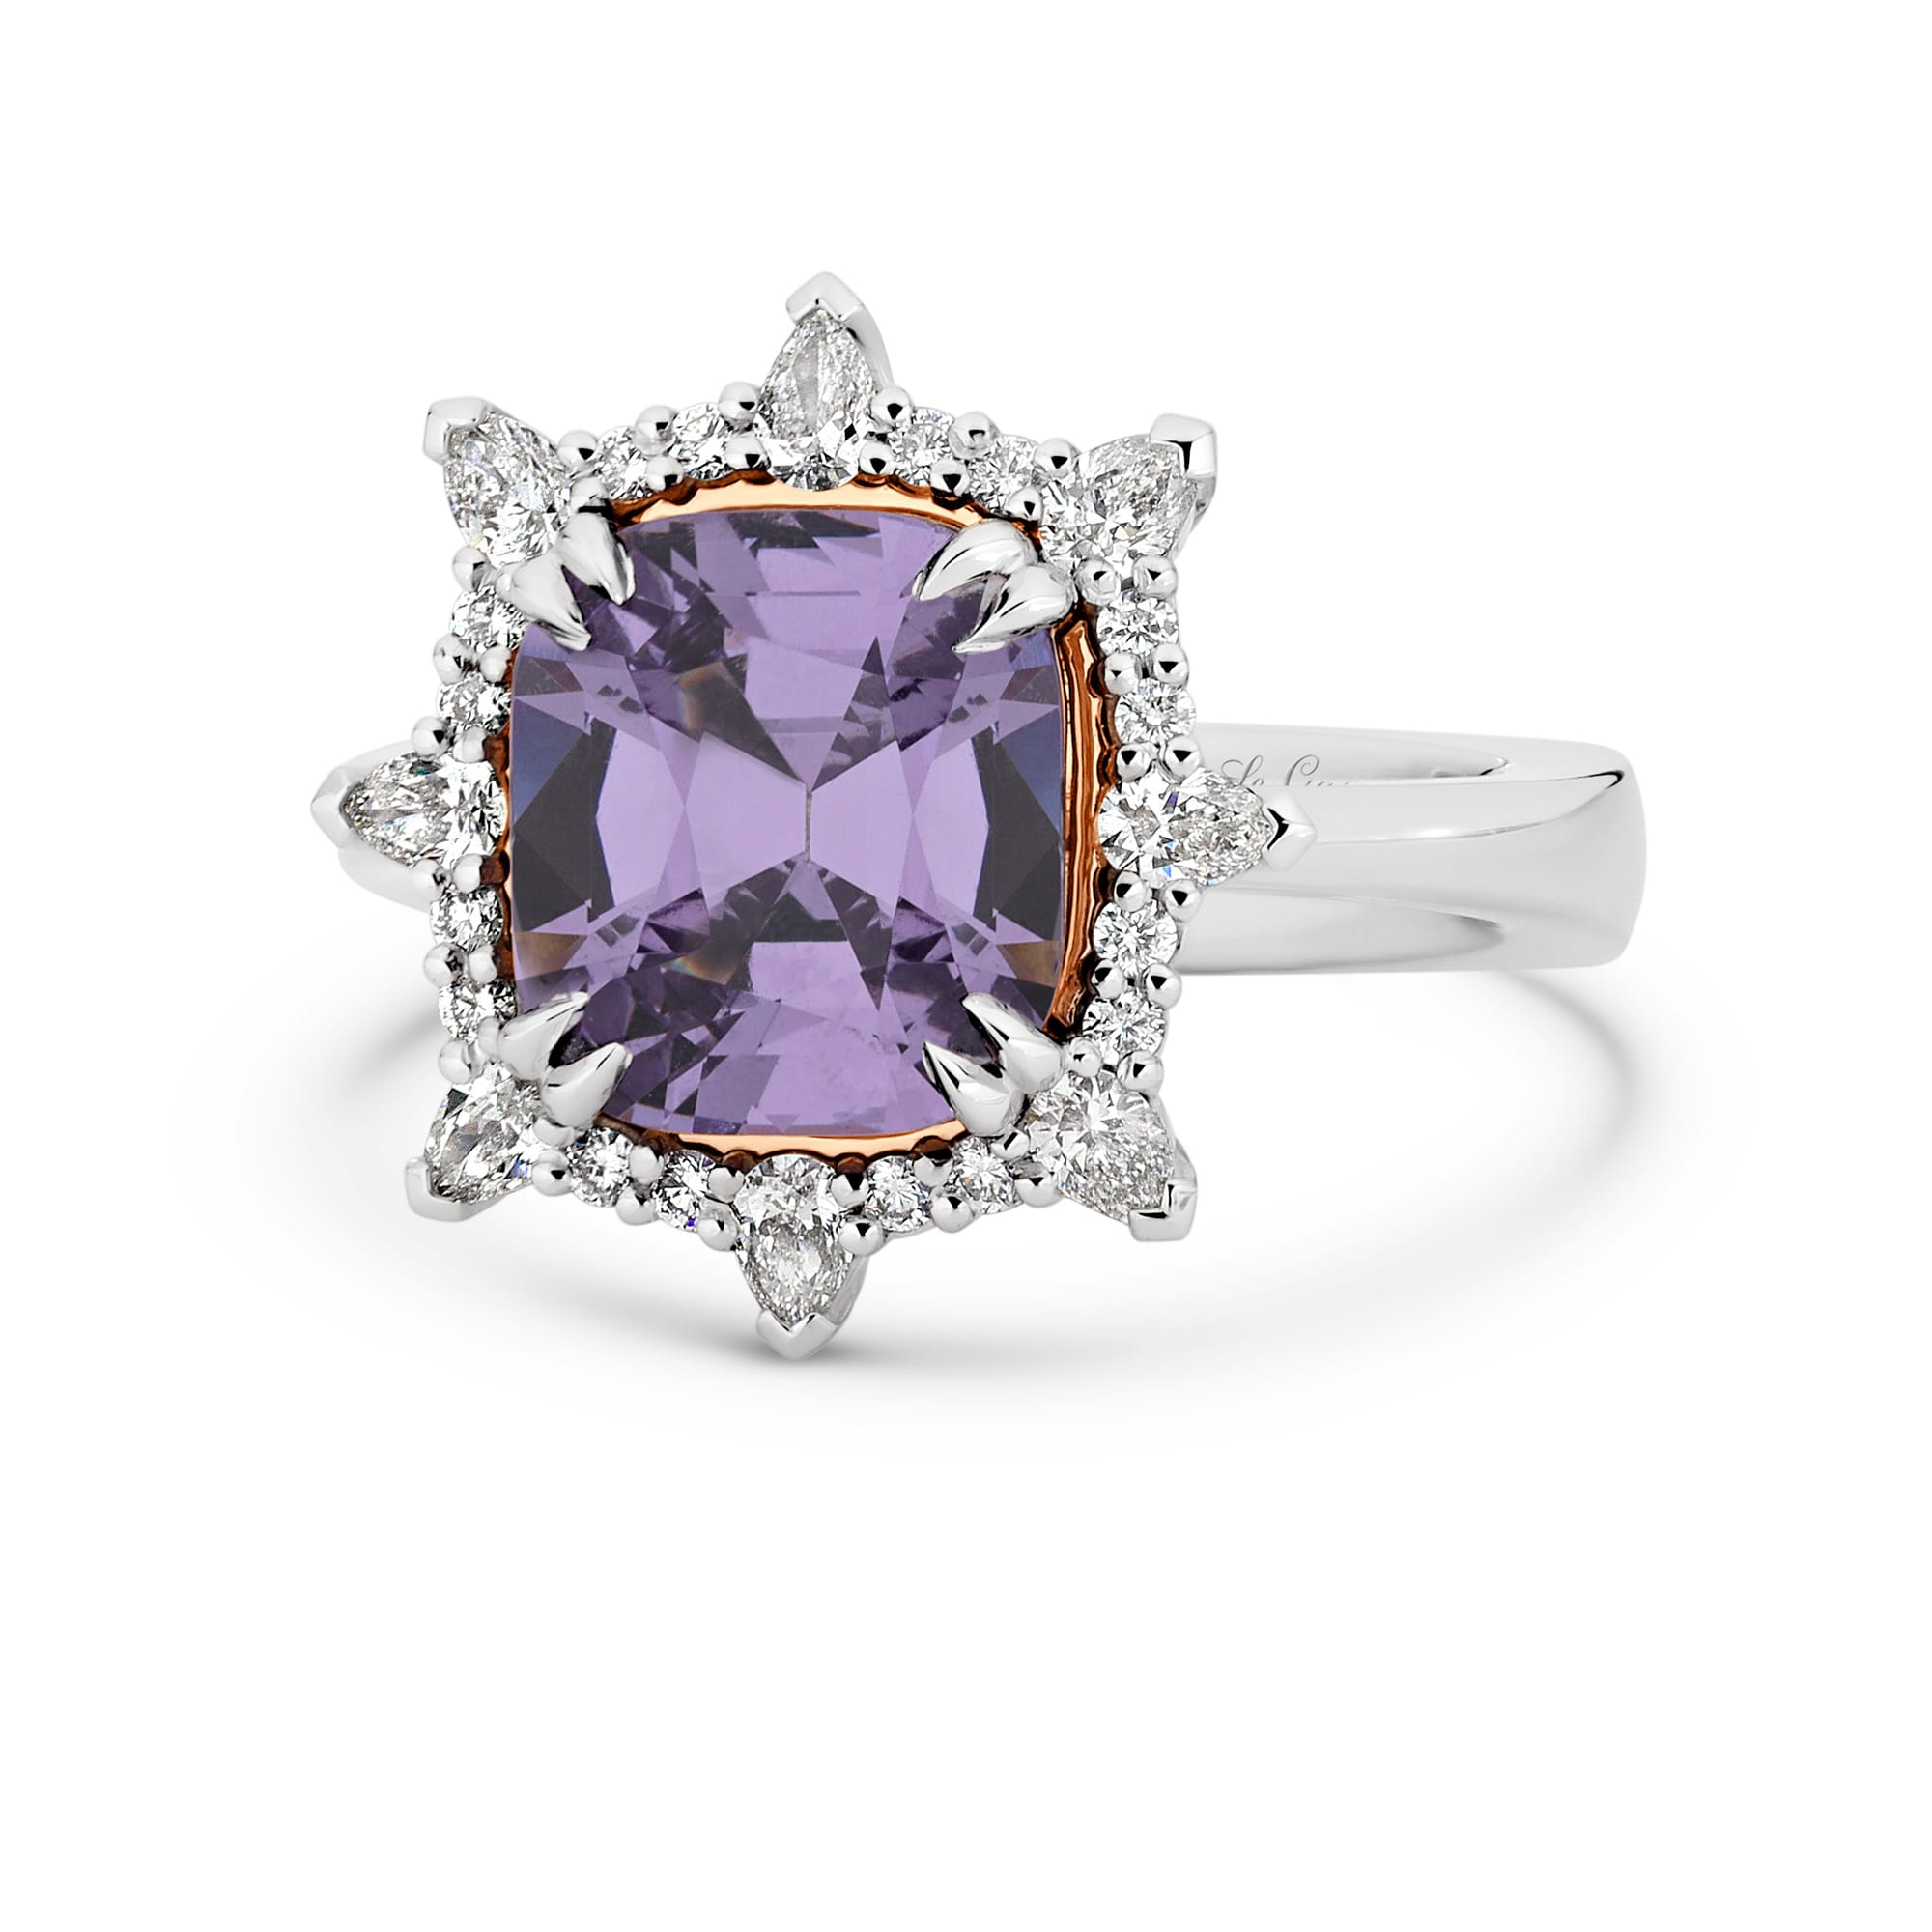 Alexandra features a 3.74 carat fusion cut Lavender Spinel centre gemstone. The centre stone sits upon a rose gold cradle and is encased with a diamond halo crown. She was designed and handcrafted by LeGassick's Master Jewellers, Gold Coast, Australia.